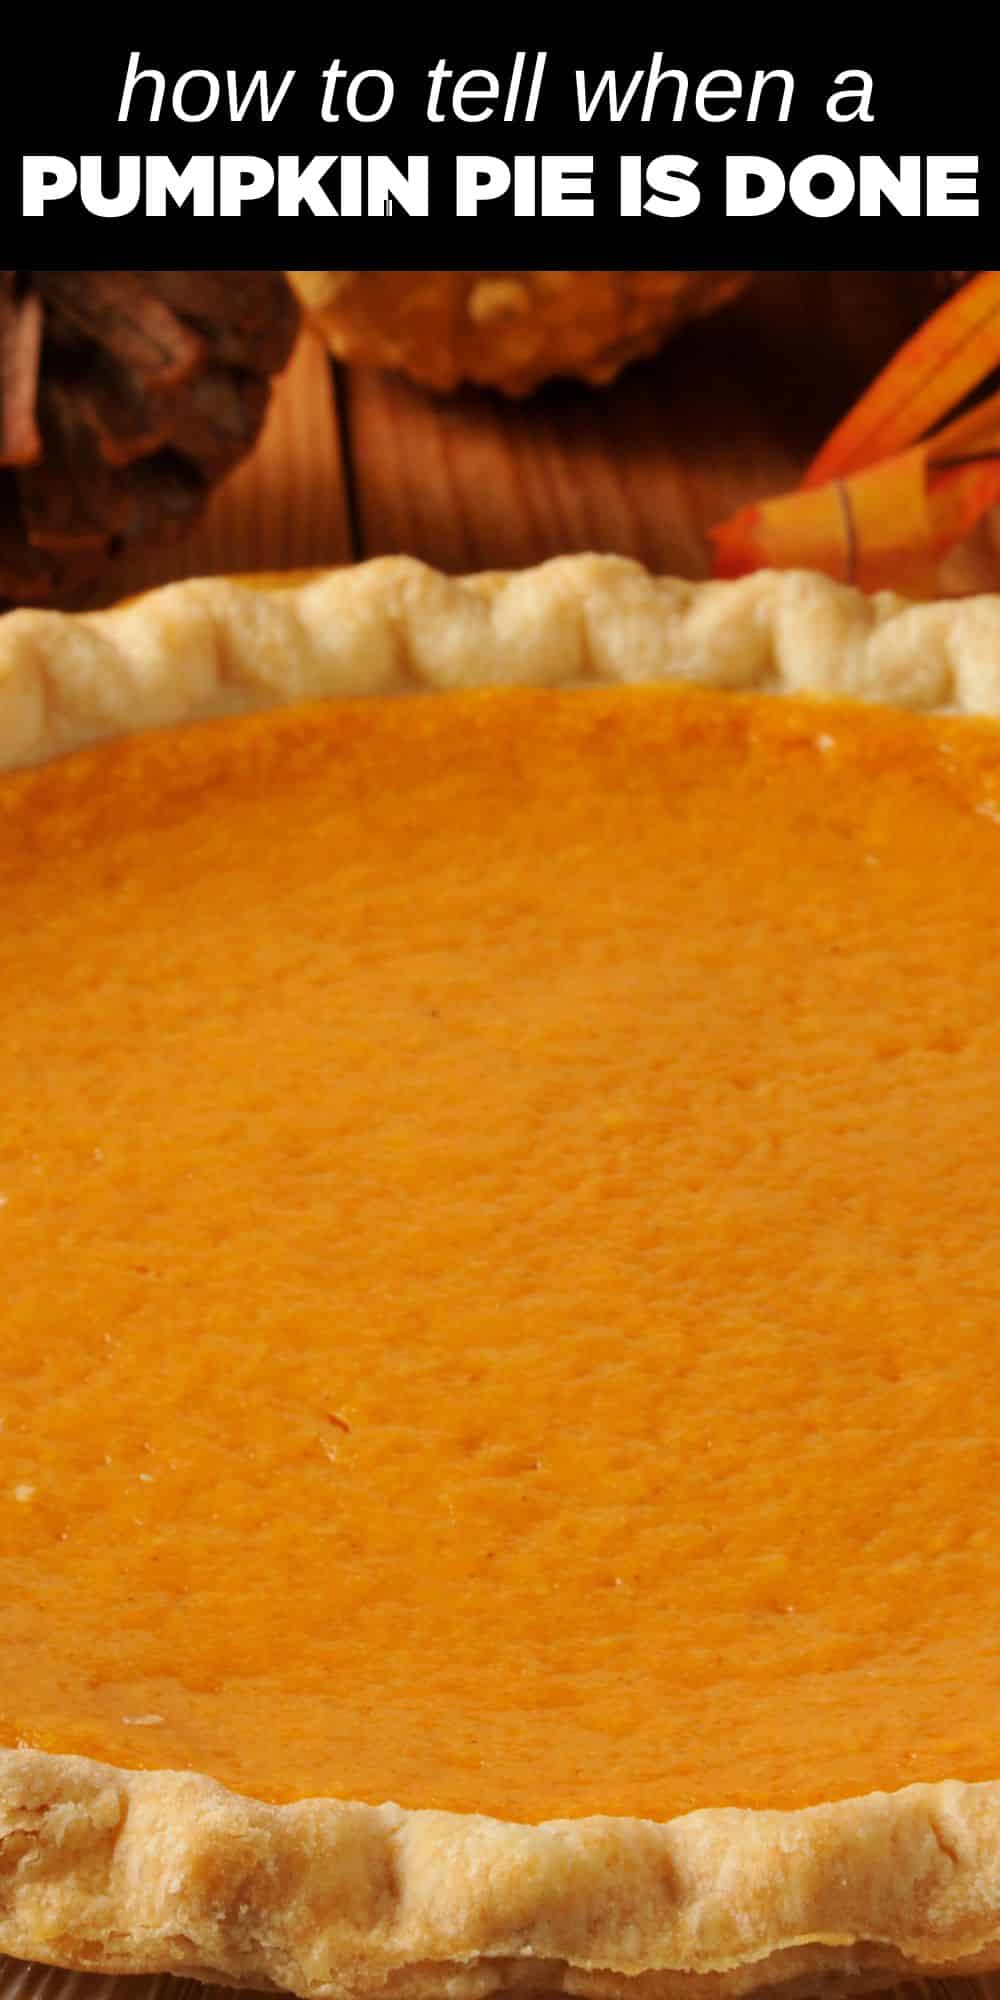 Use this guide to help you tell if pumpkin pie is done. Follow these tips, and you’ll be enjoying a perfectly baked pie with a creamy and delicious filling and perfect golden brown and flaky crust in no time.